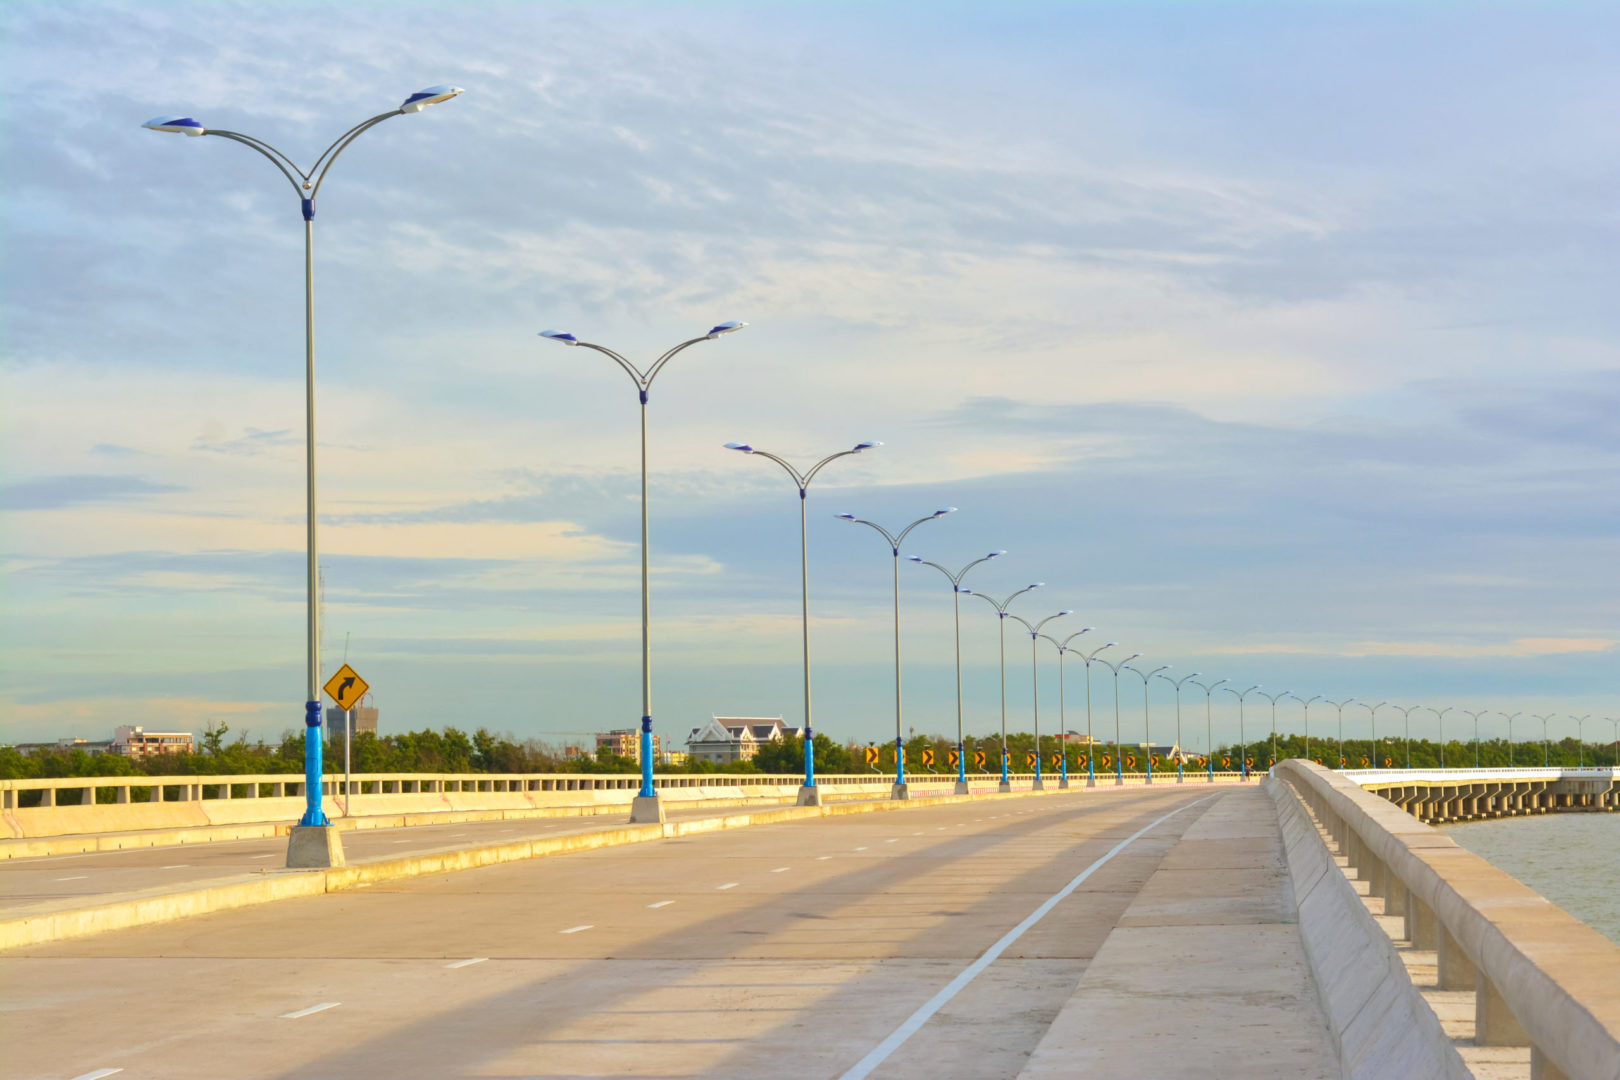 An empty highway bridge with a row of light poles lining the center median.